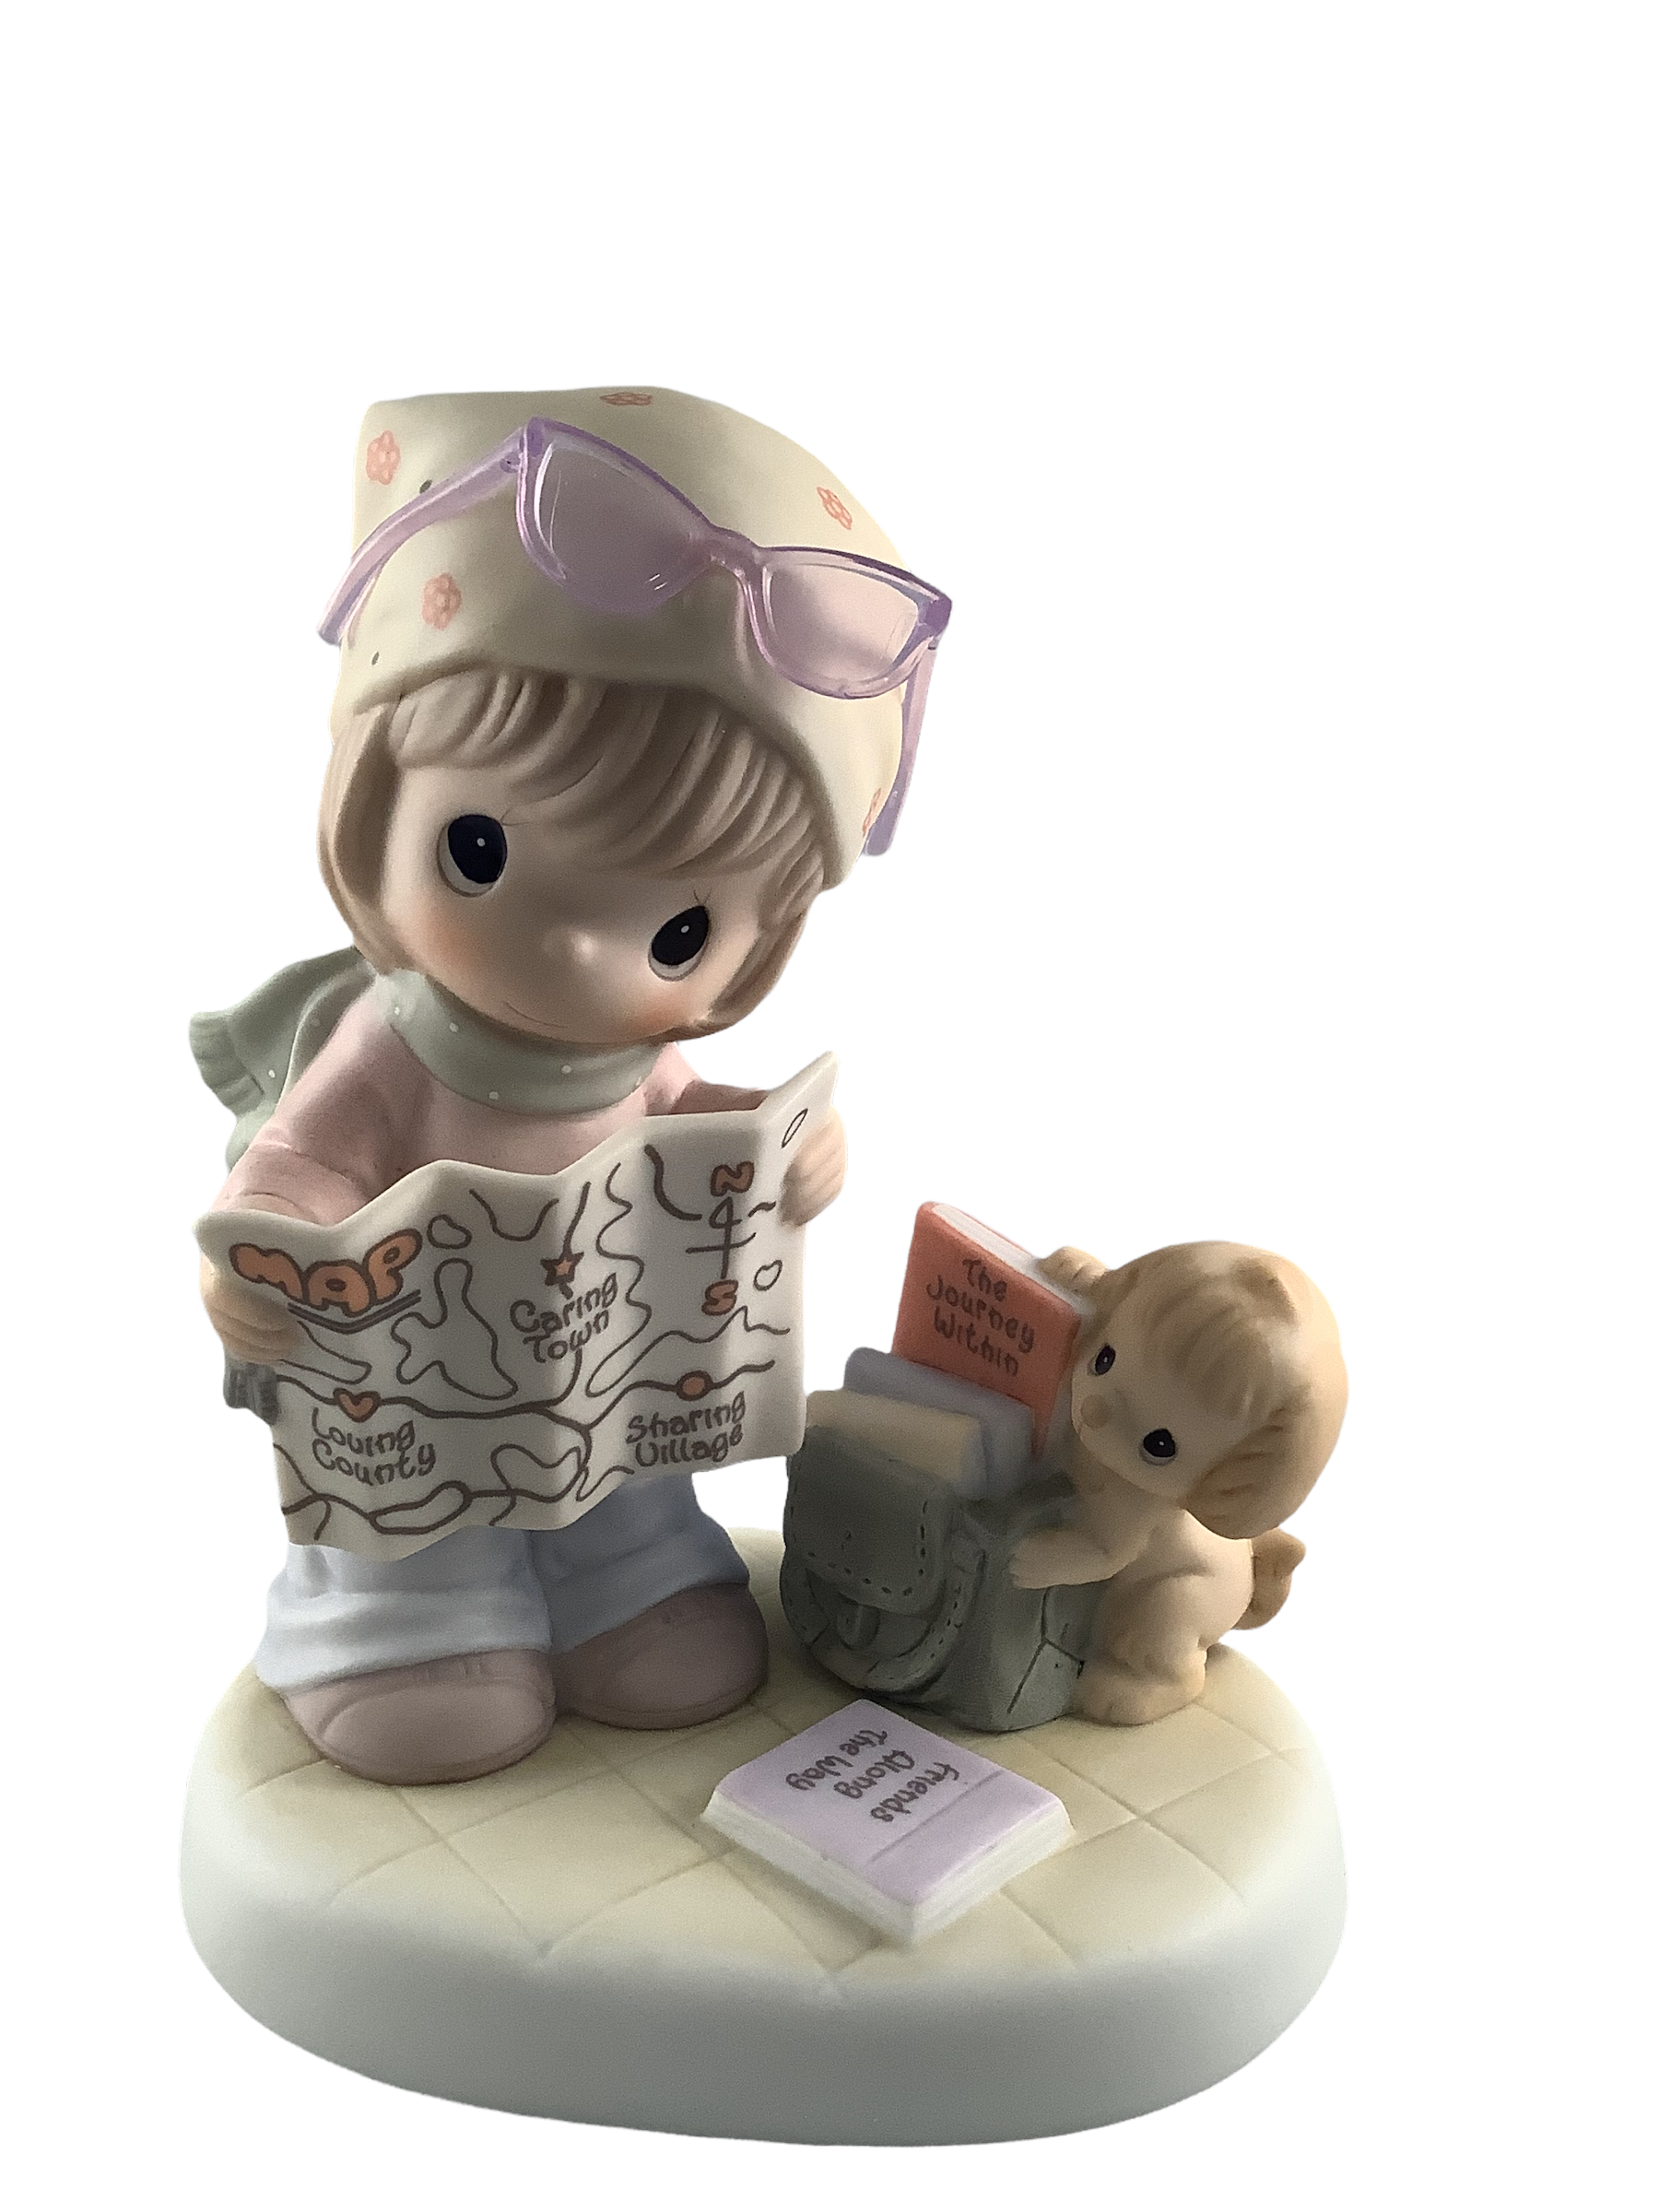 Map A Route Toward Loving, Caring, And Sharing - Precious Moment Figurine